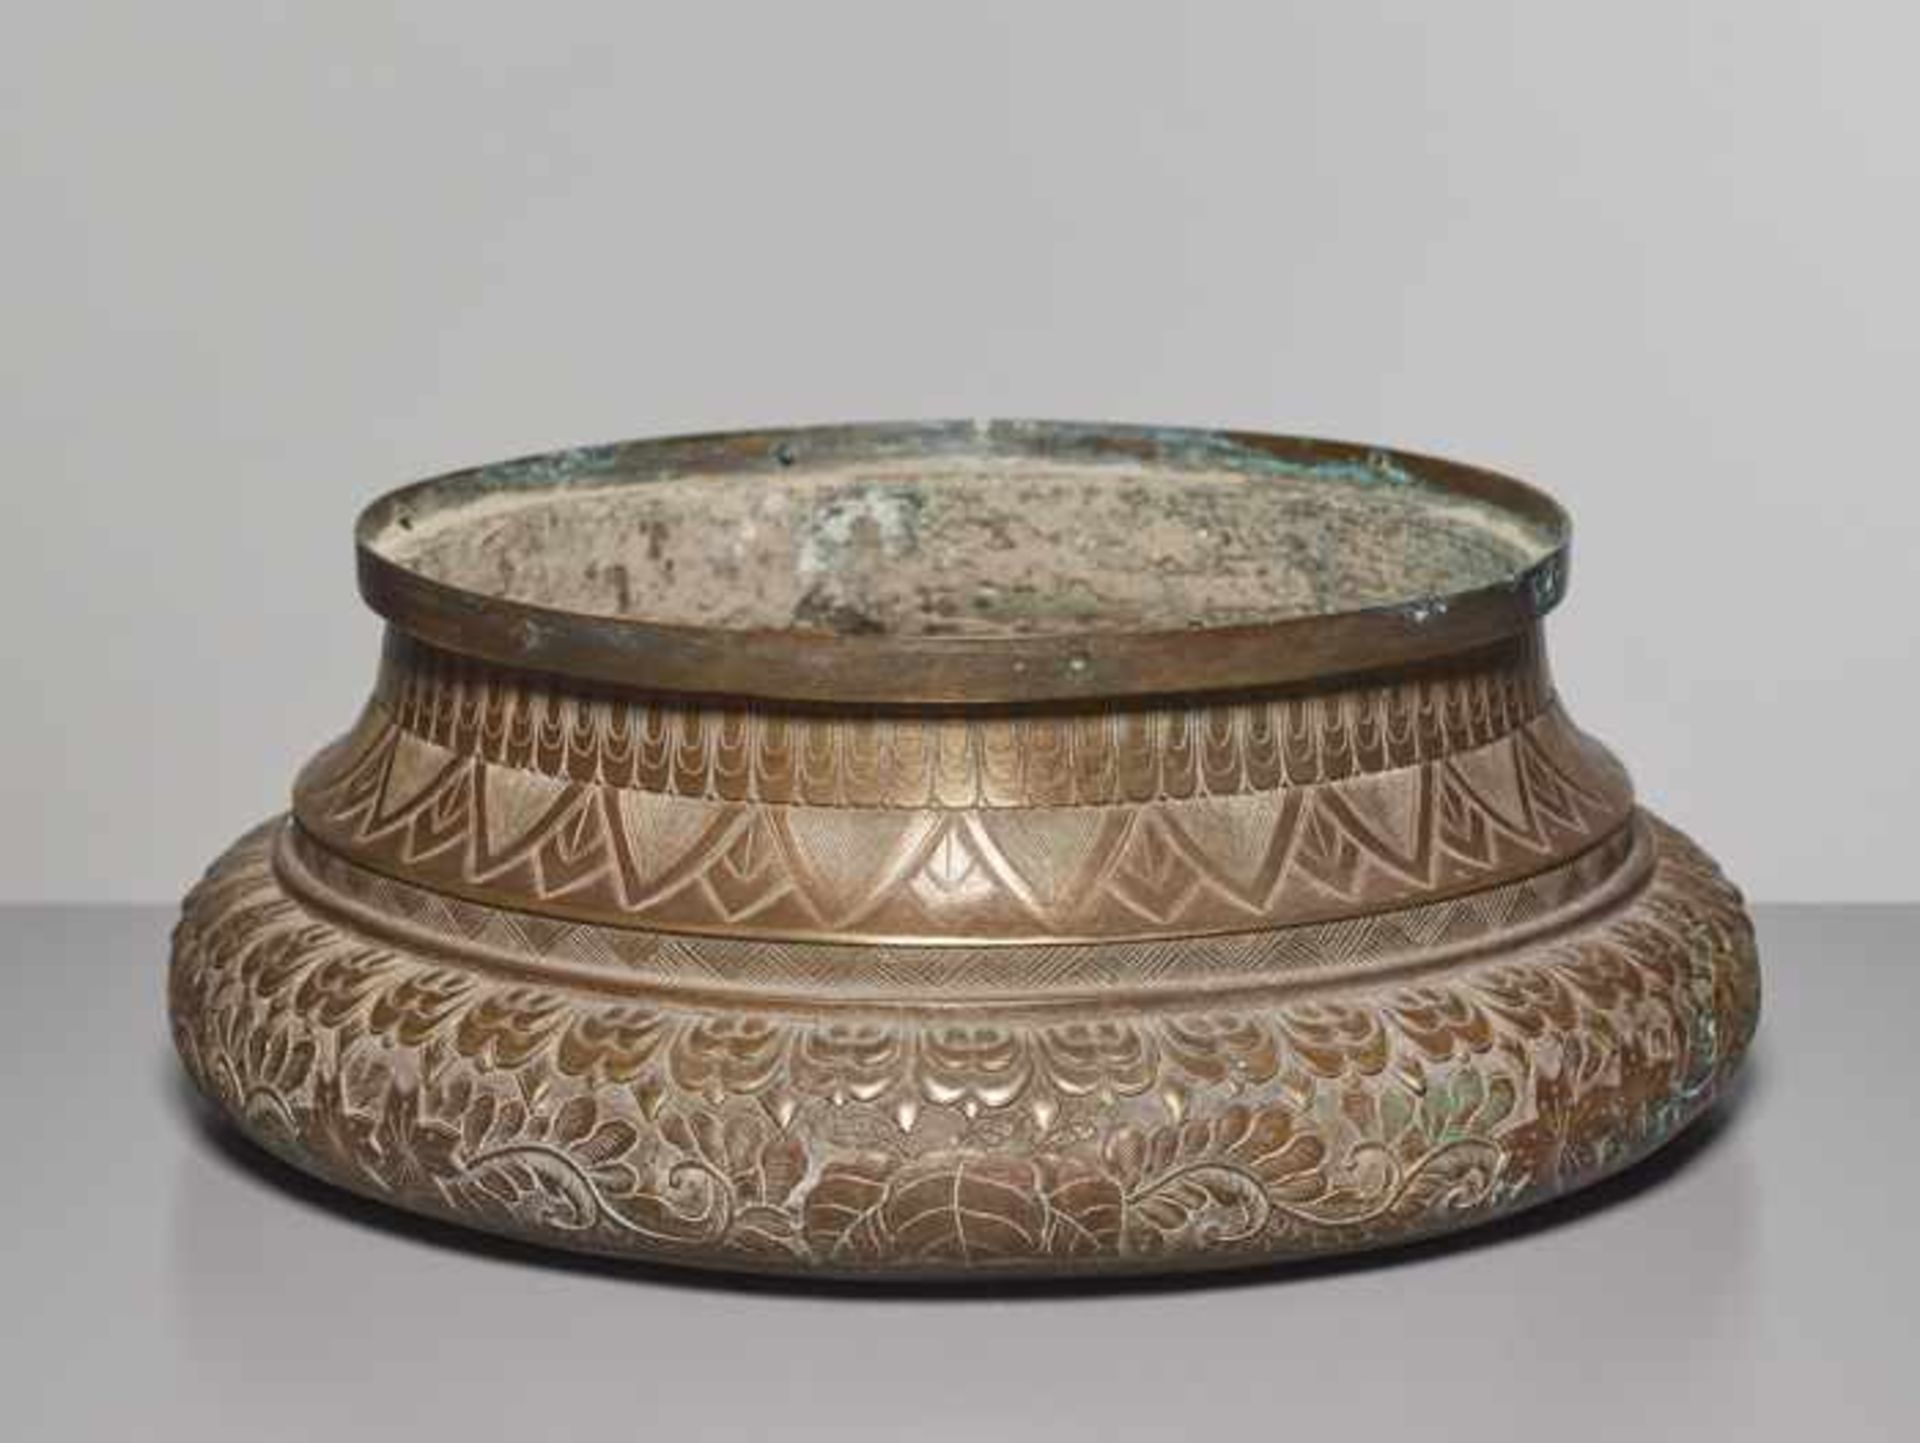 AN ENGRAVED BRONZE BASIN, QING DYNASTY Cast of massive and heavy bronze, with neatly incised